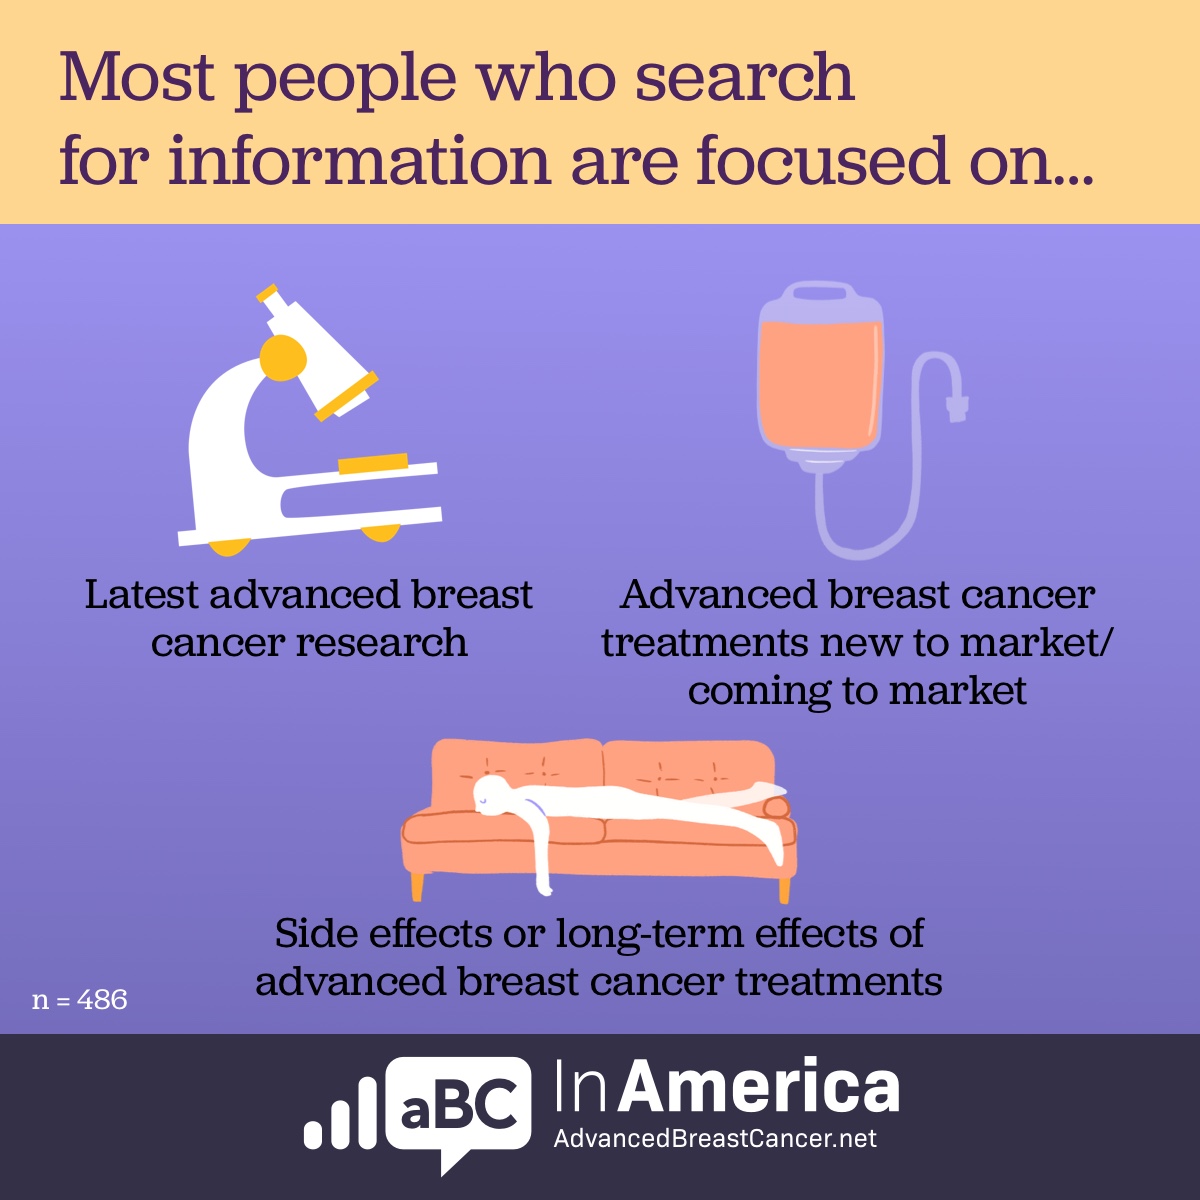 Most people searching about advanced breast cancer treatments seek information about side effects, long-term effects of treatments, latest research/new treatments.